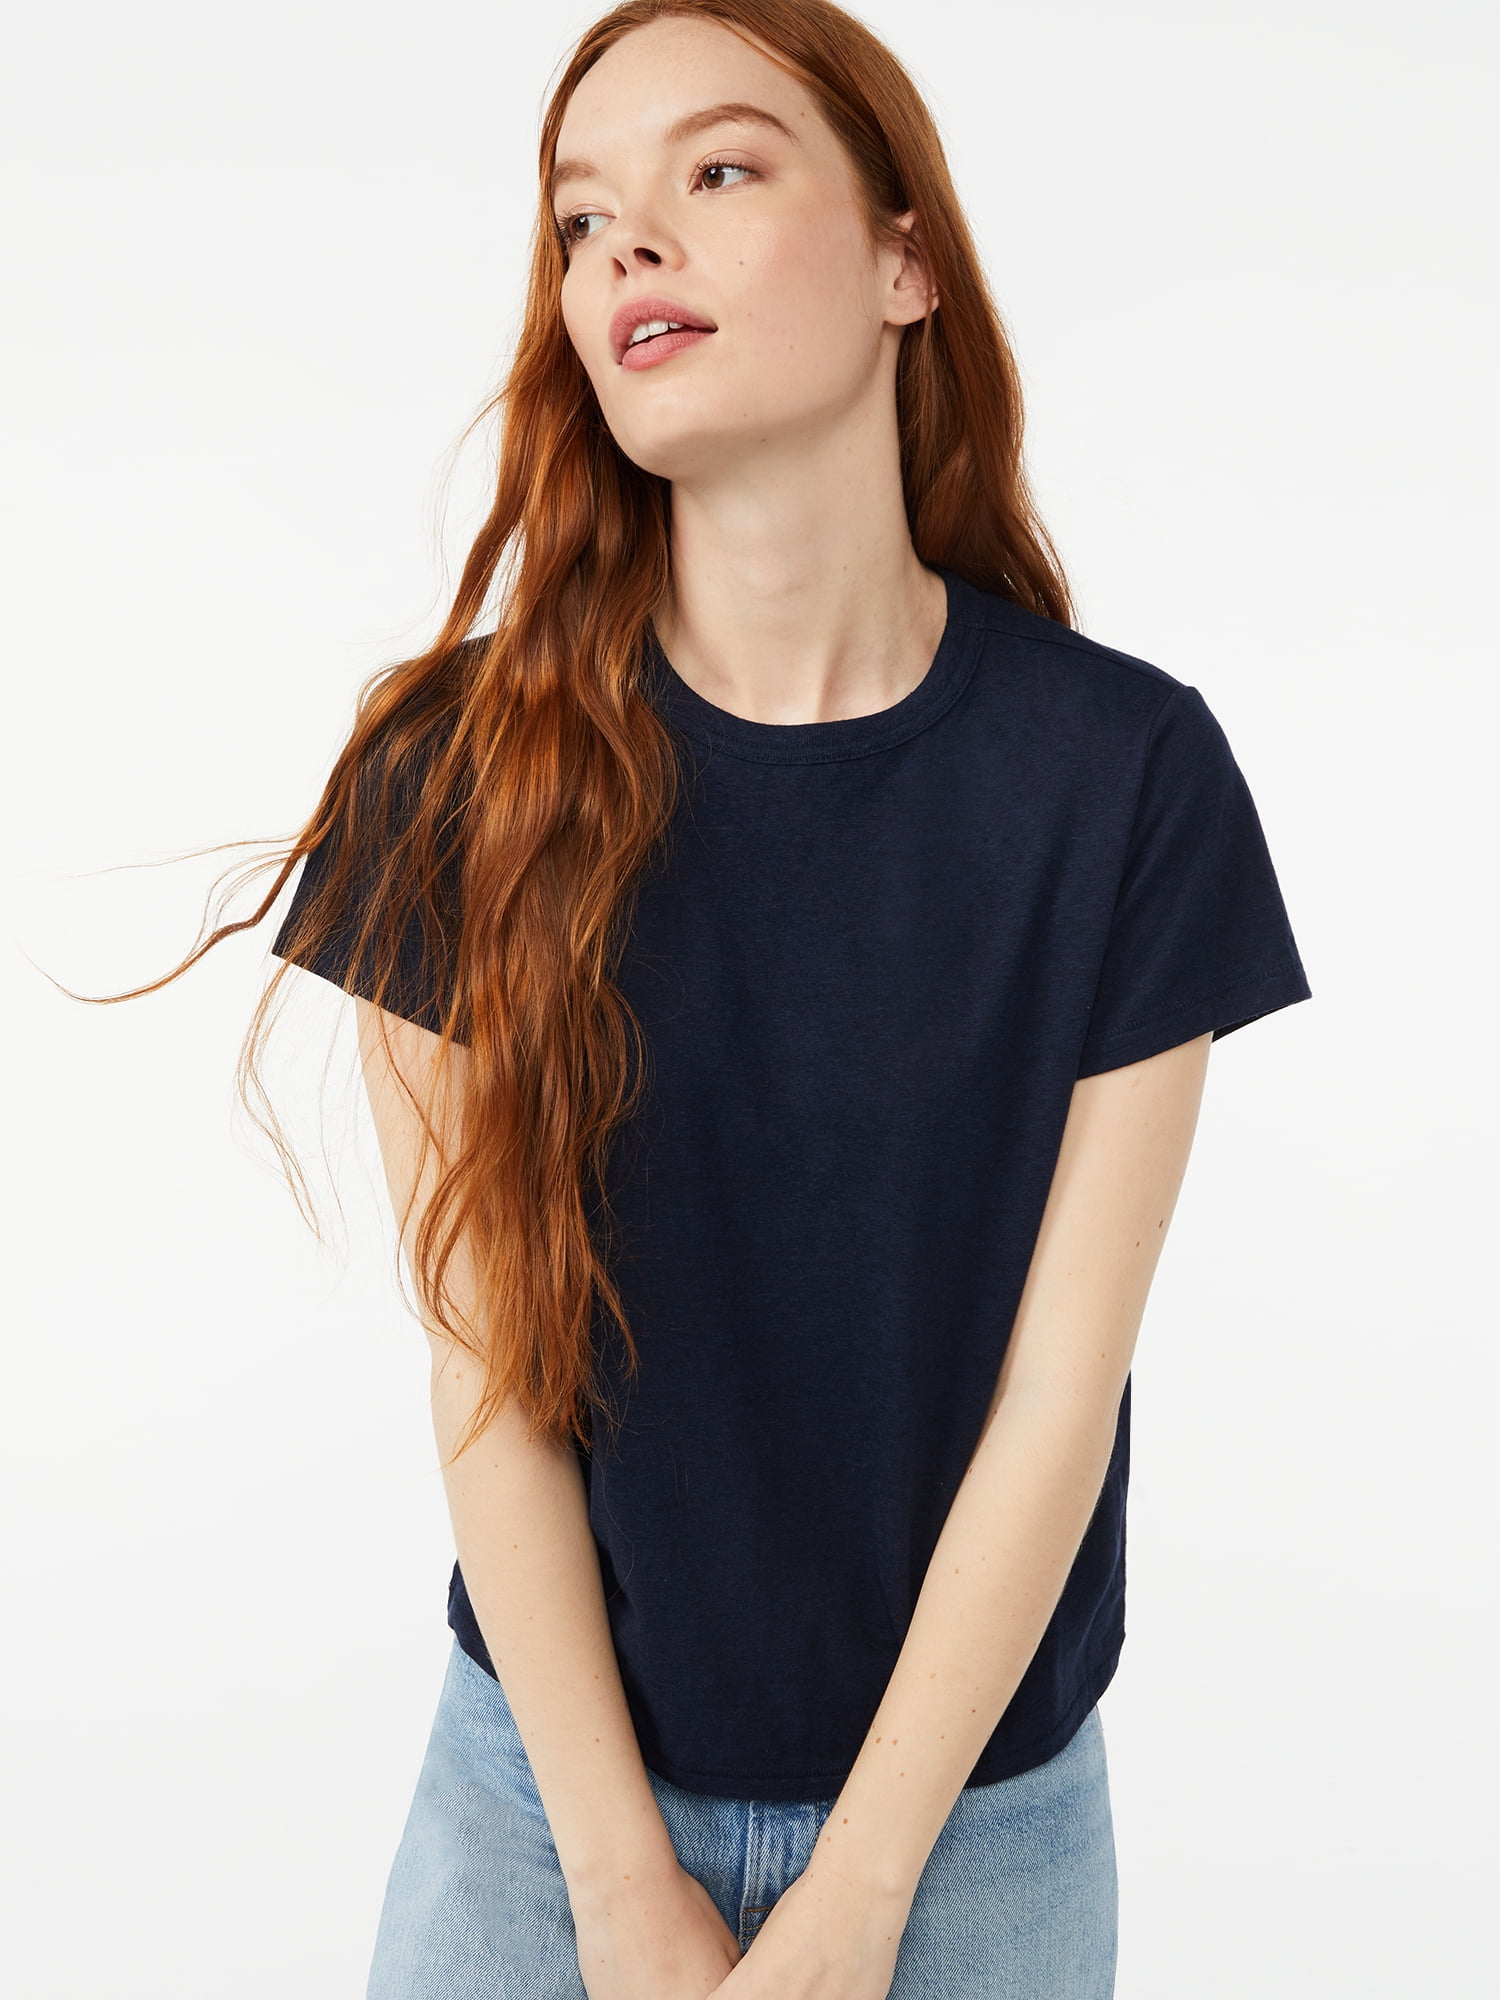 Free Assembly Women's Ringer Tee with Short Sleeves